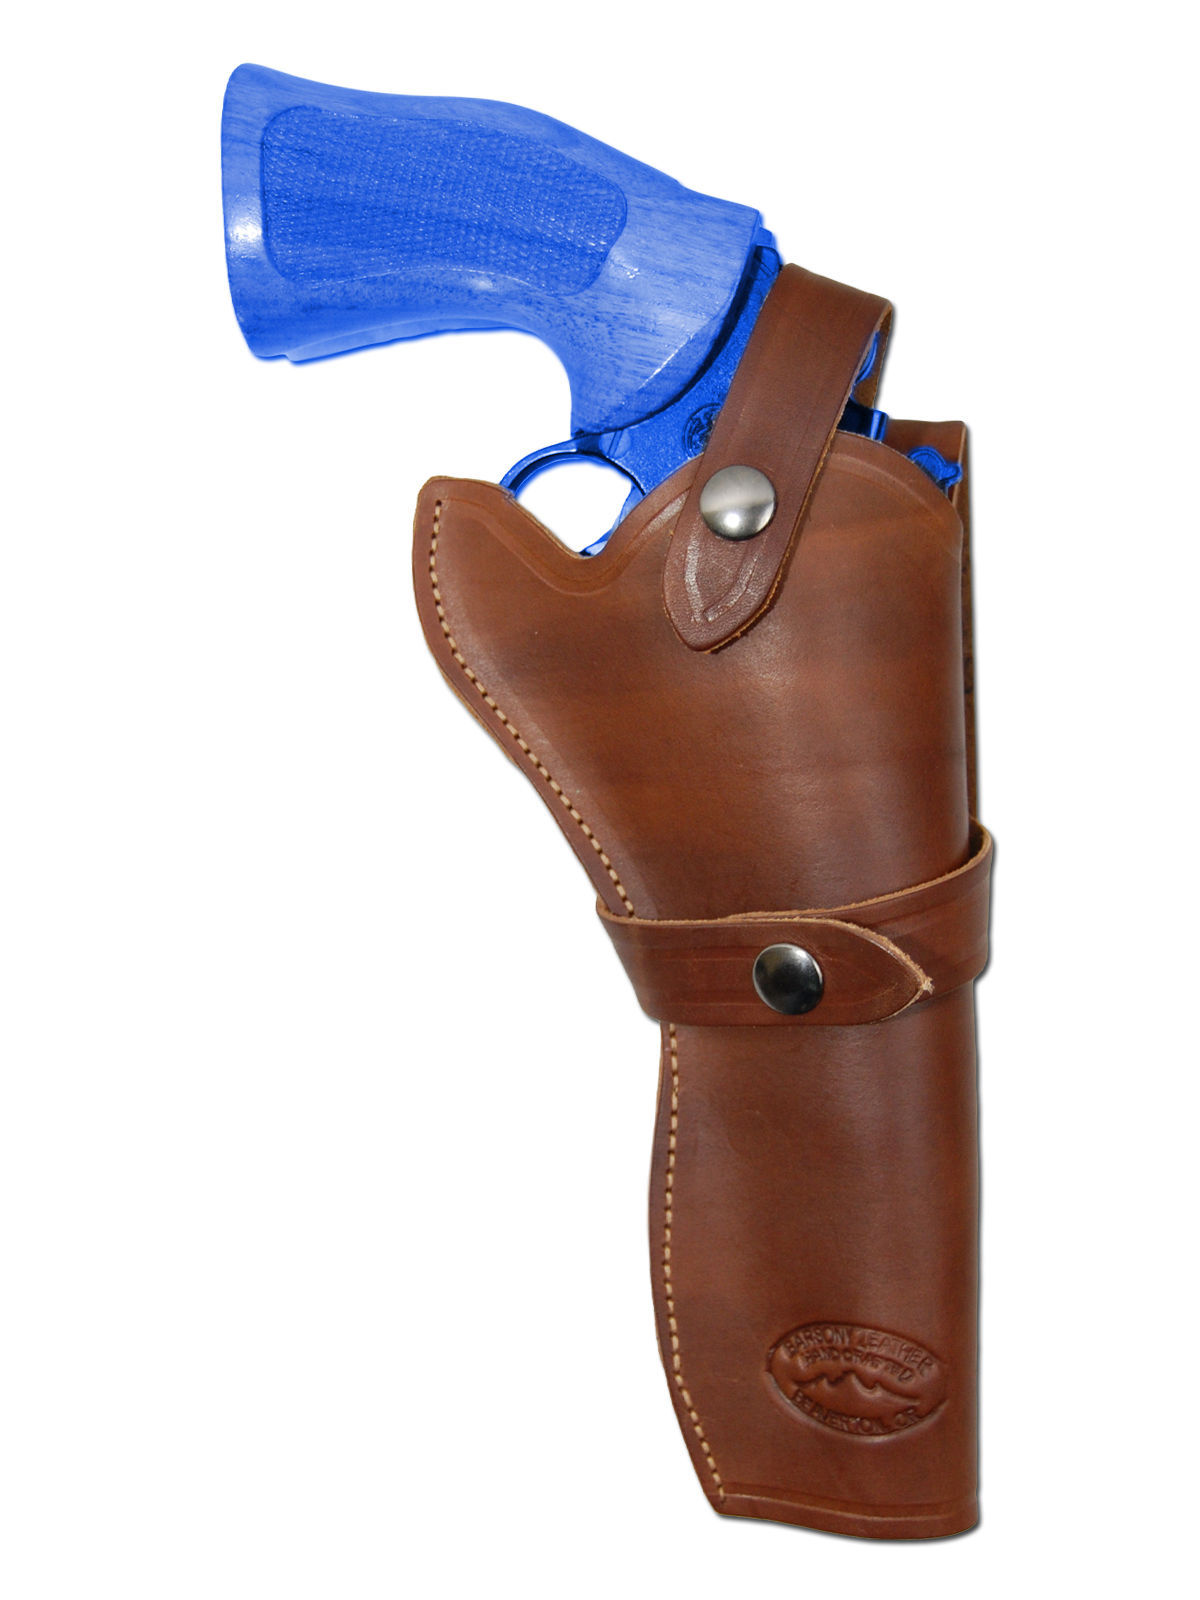 New Barsony Brown Leather Western Style Gun Holster Smith And Wesson 6 1507